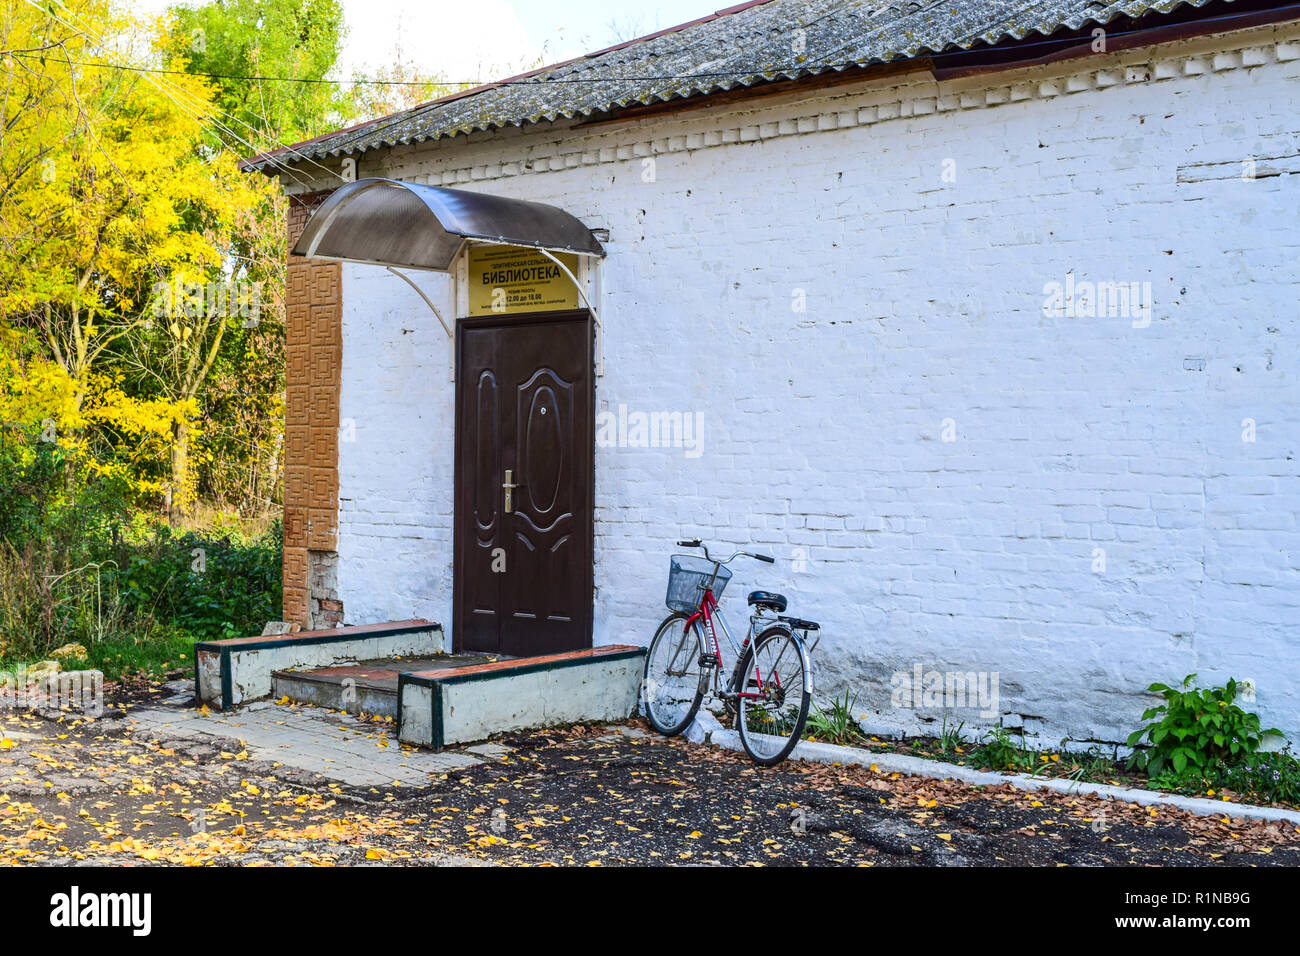 Settlement Elitnyy, Russia - April 07, 2016: Rural library outside. Bicycle visitor library. The old Soviet building Stock Photo